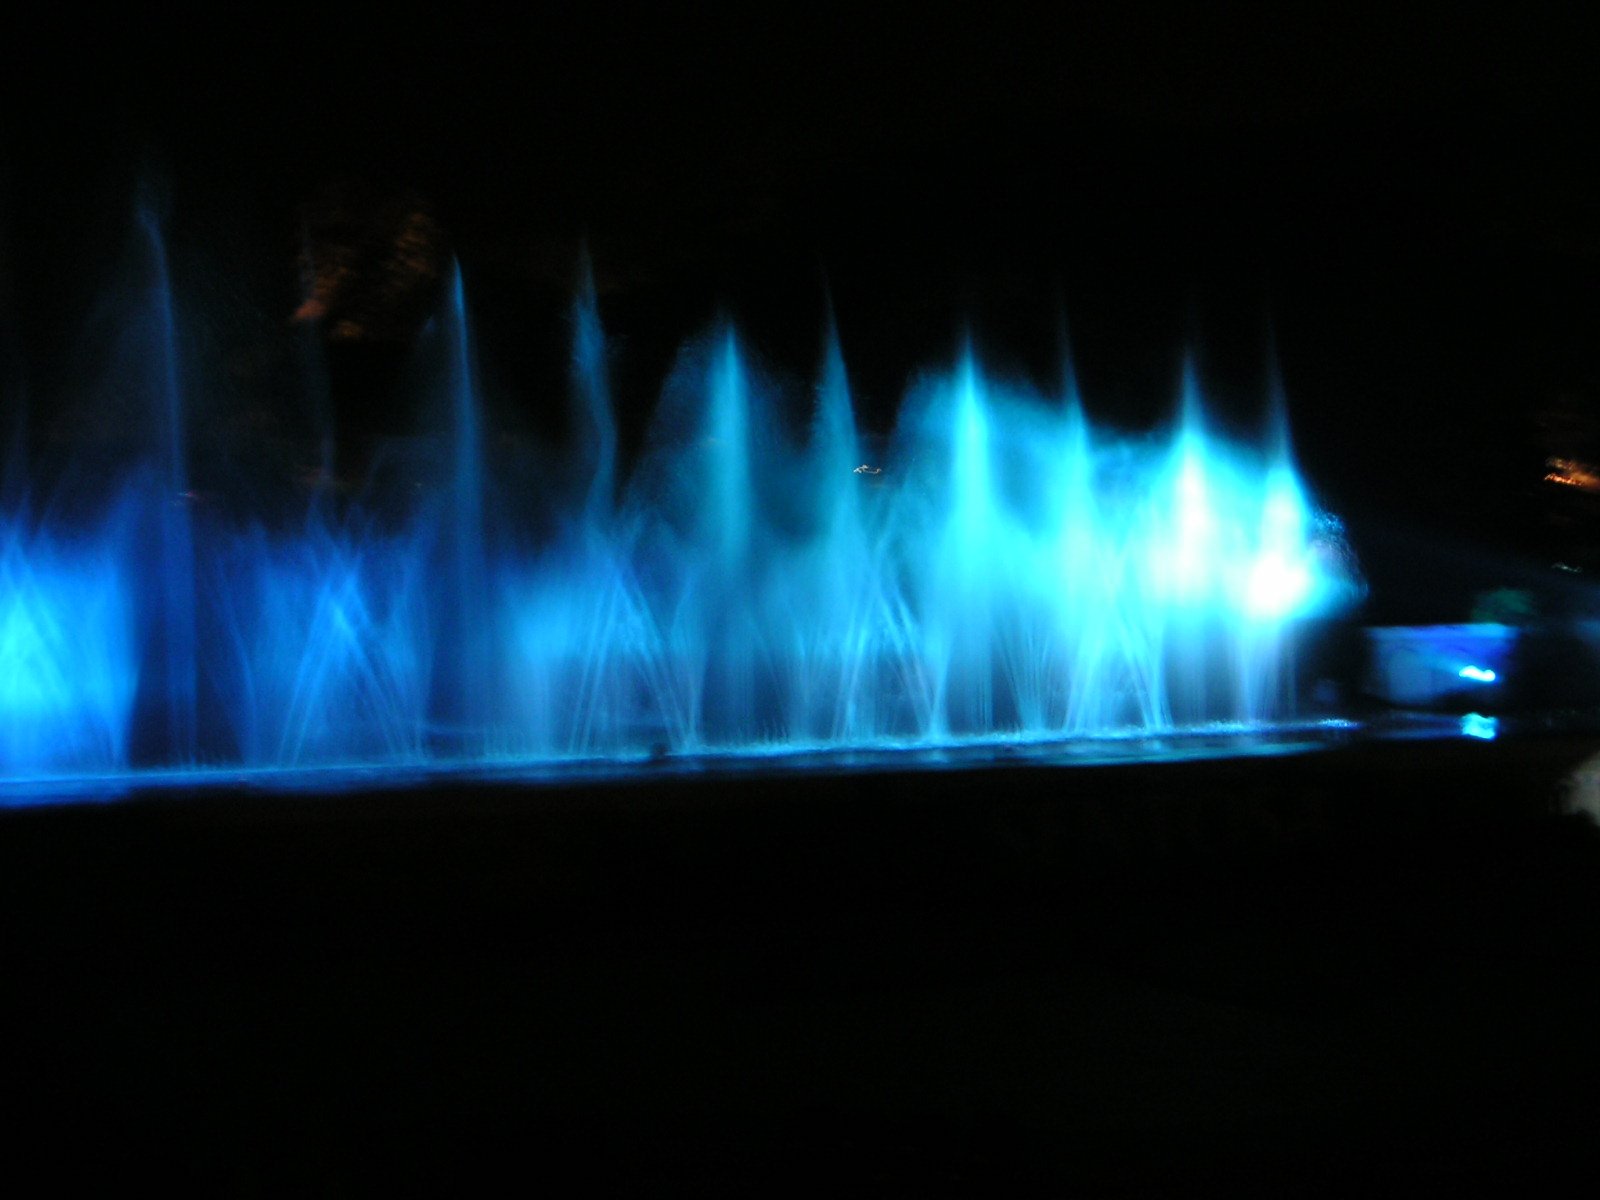 the water is illuminated and is moving at night